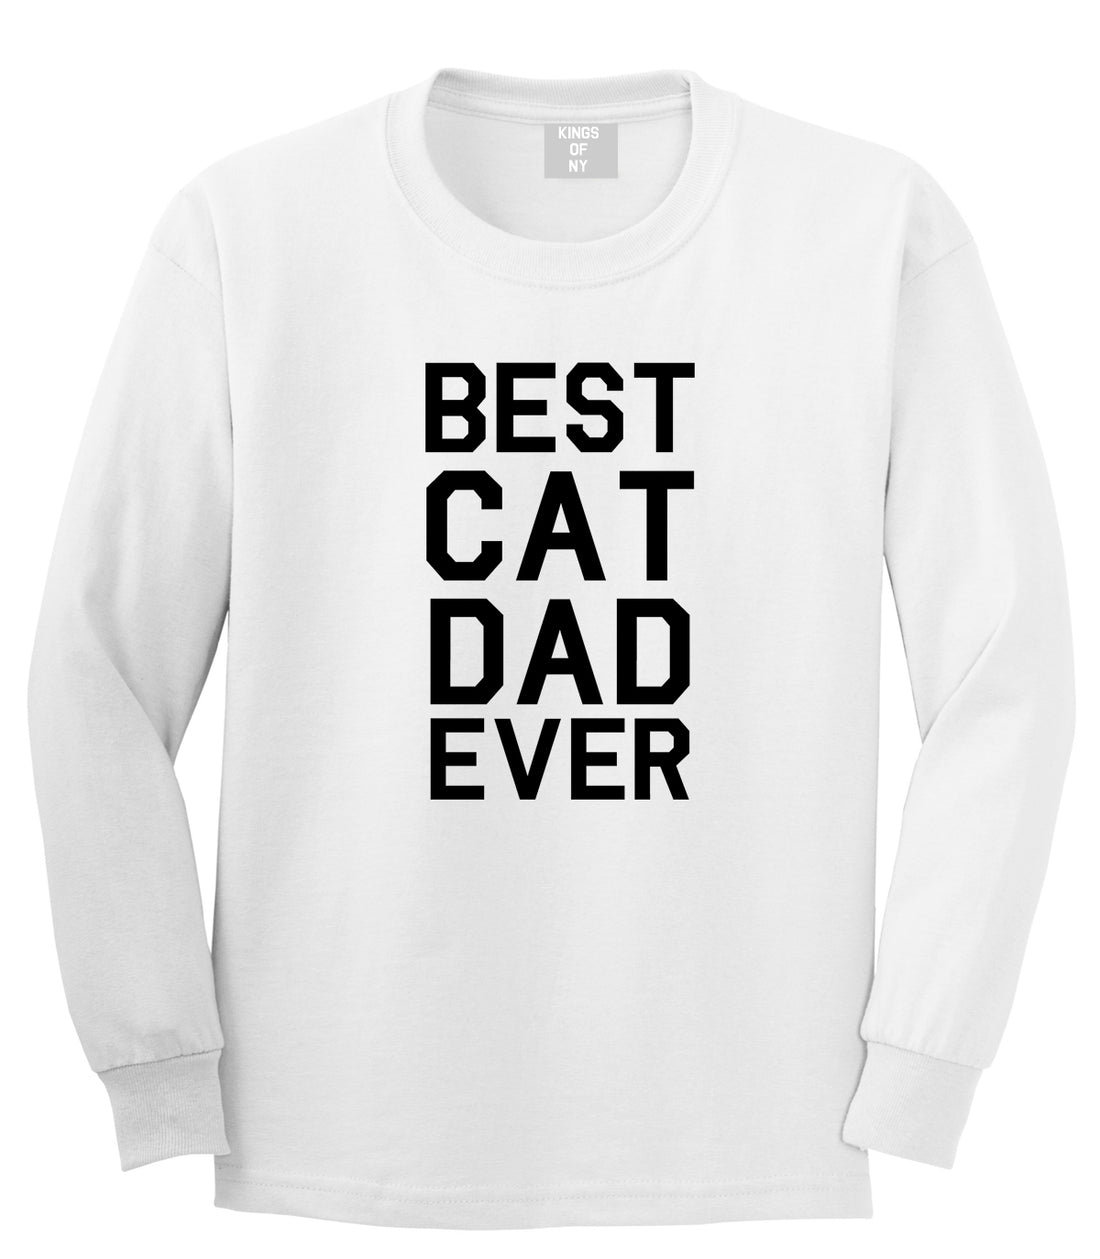 Best Cat Dad Ever Mens White Long Sleeve T-Shirt by Kings Of NY